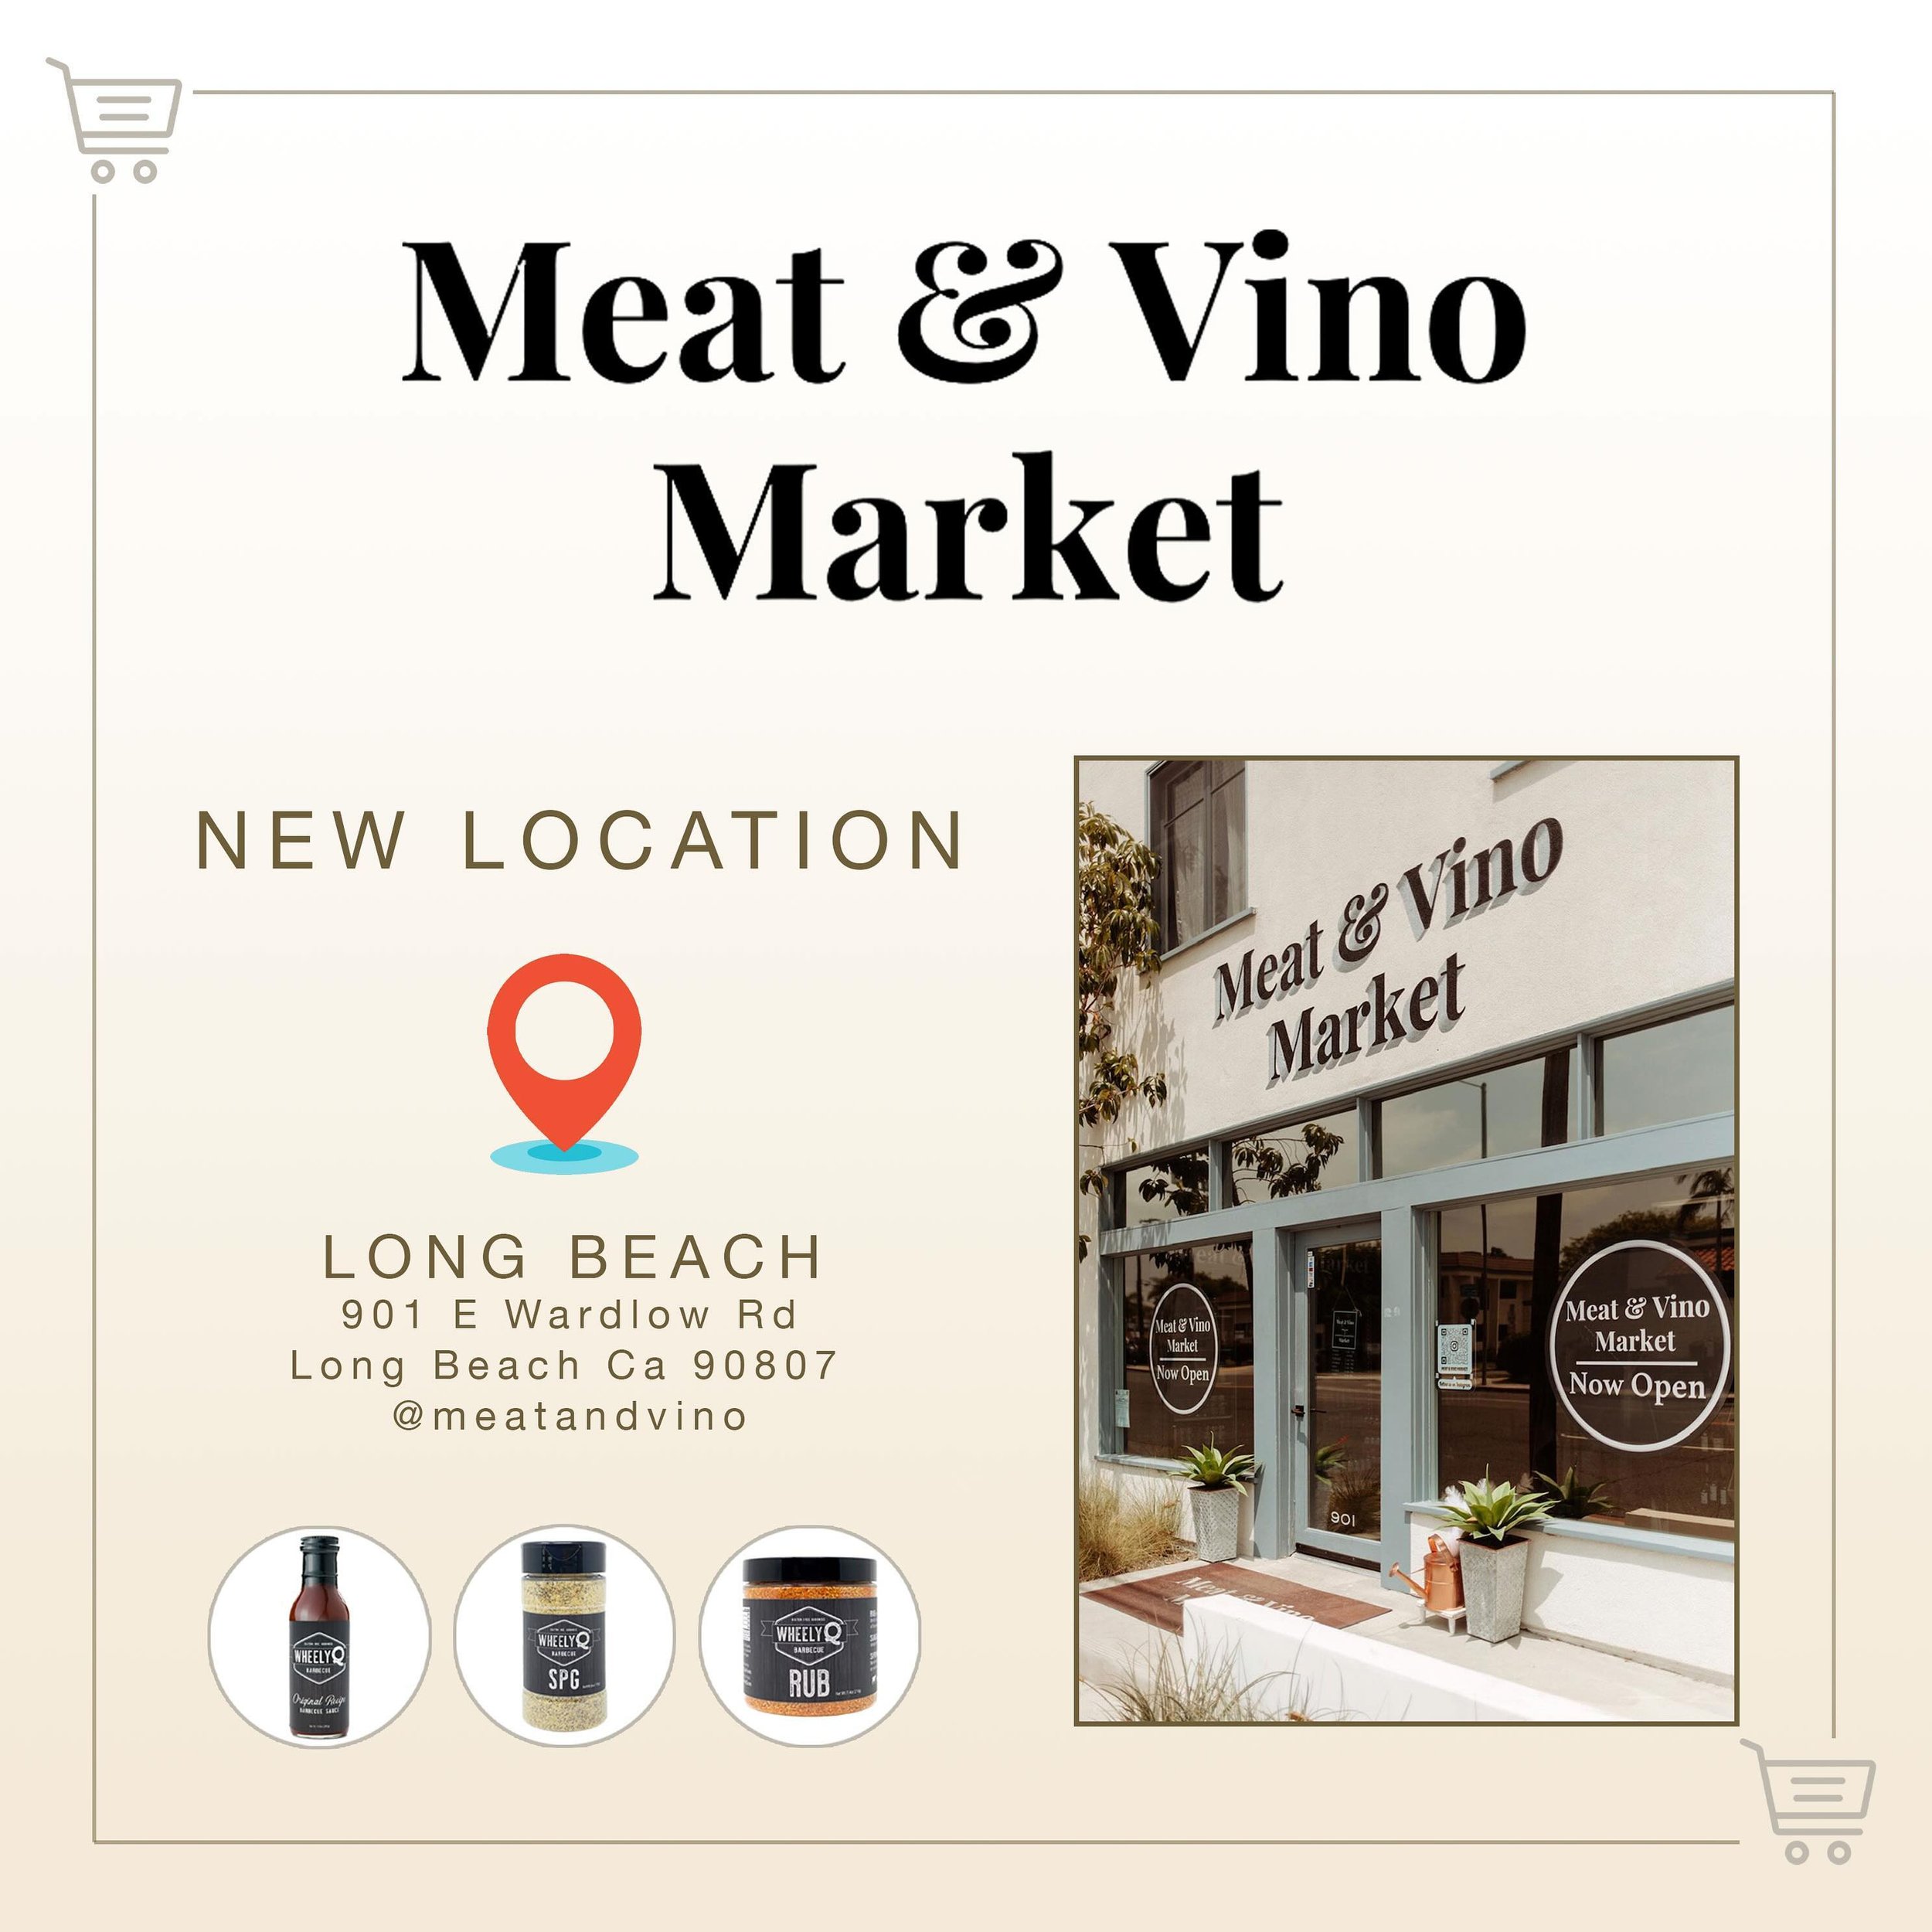 LONG BEACH FRIENDS!

We&rsquo;ve got you hooked up with a new location that&rsquo;s stocked with WheelyQ!  You can find our Barbecue Sauce, SPG Seasoning and All Purpose Rub.

Go check out Meat &amp; Vino Market in Long Beach, CA They carry a selecti